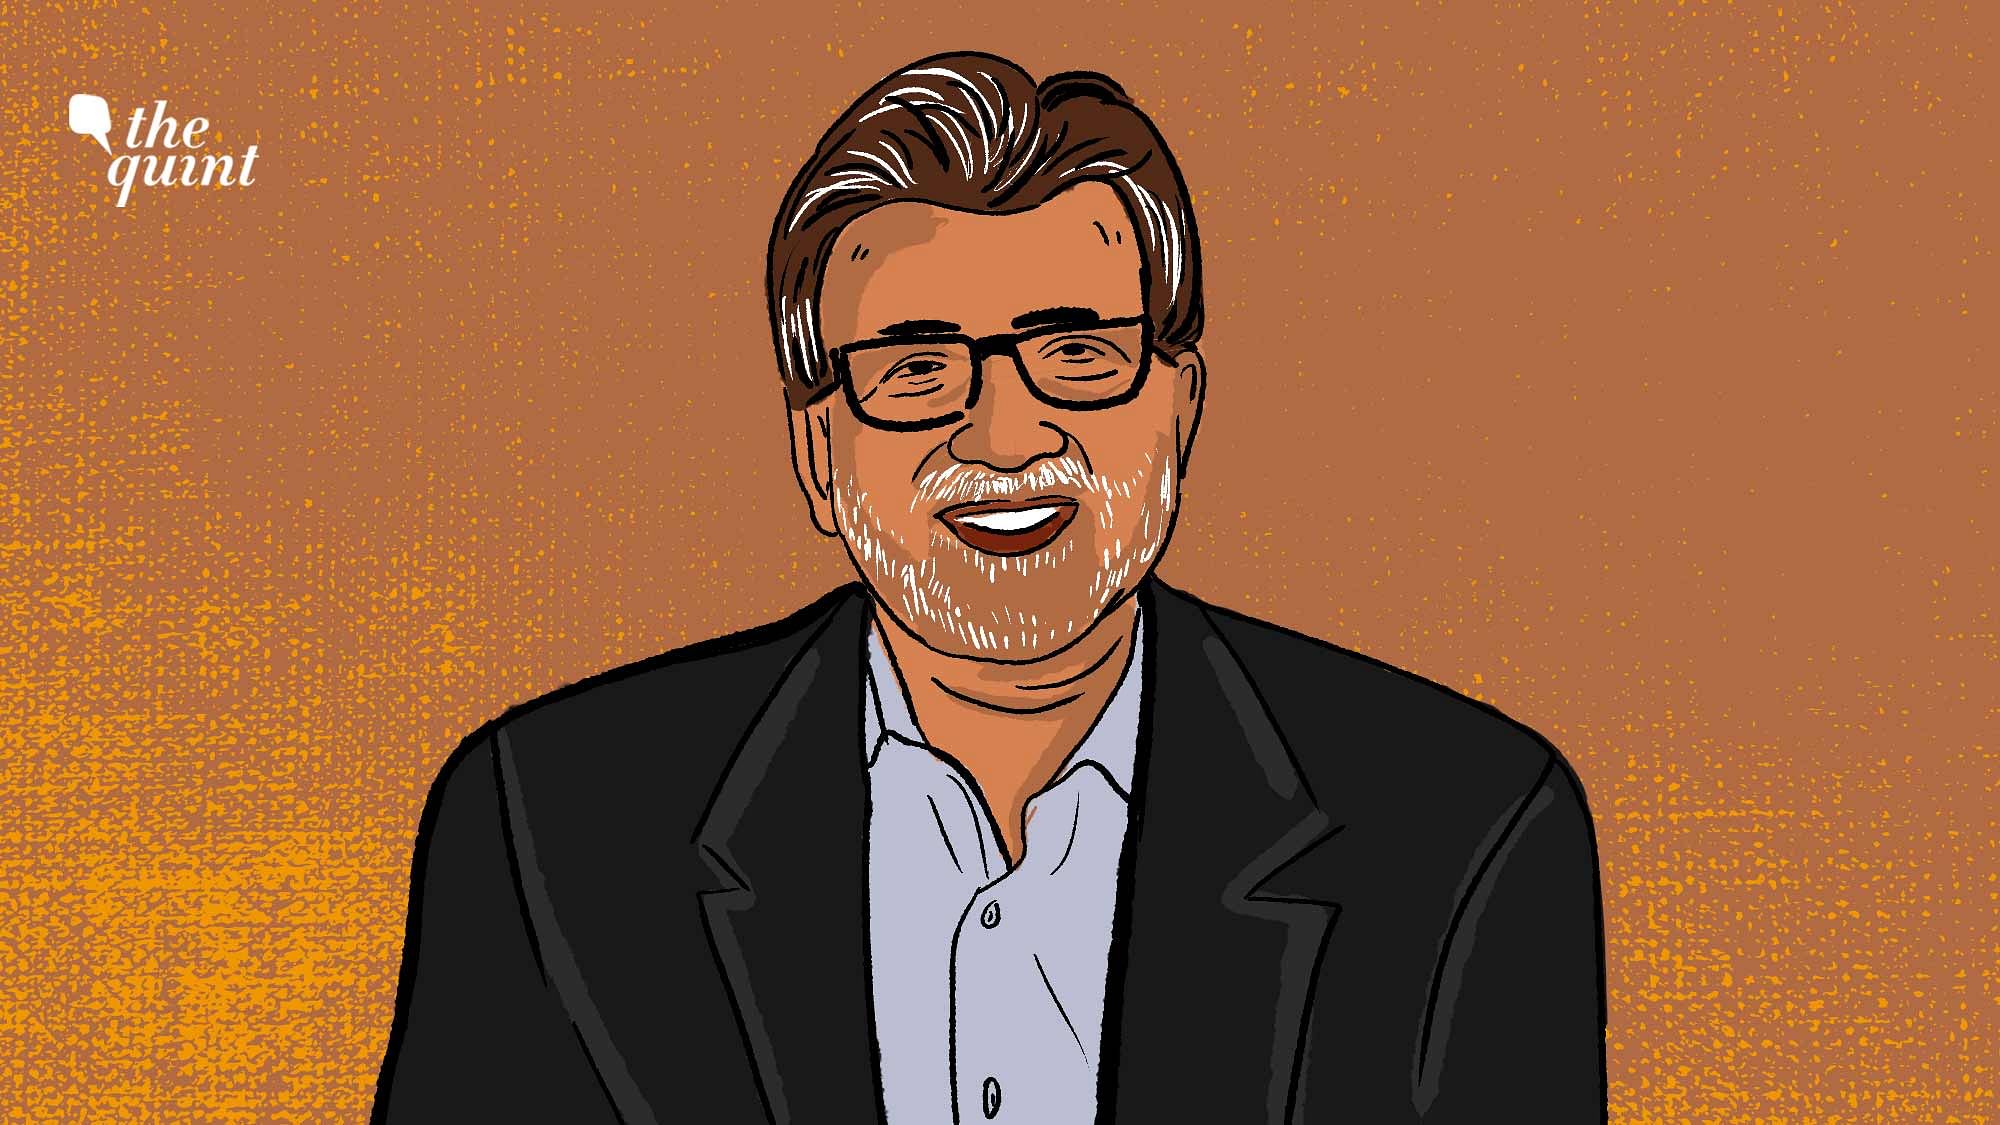 <div class="paragraphs"><p>The first Indian to take a software company public on NASDAQ, in 1993, Umang Gupta is considered a pioneer. His company, Gupta Technologies became the precursor to the Silicon Valley boom of tech companies led by Indian American CEOs.</p></div>